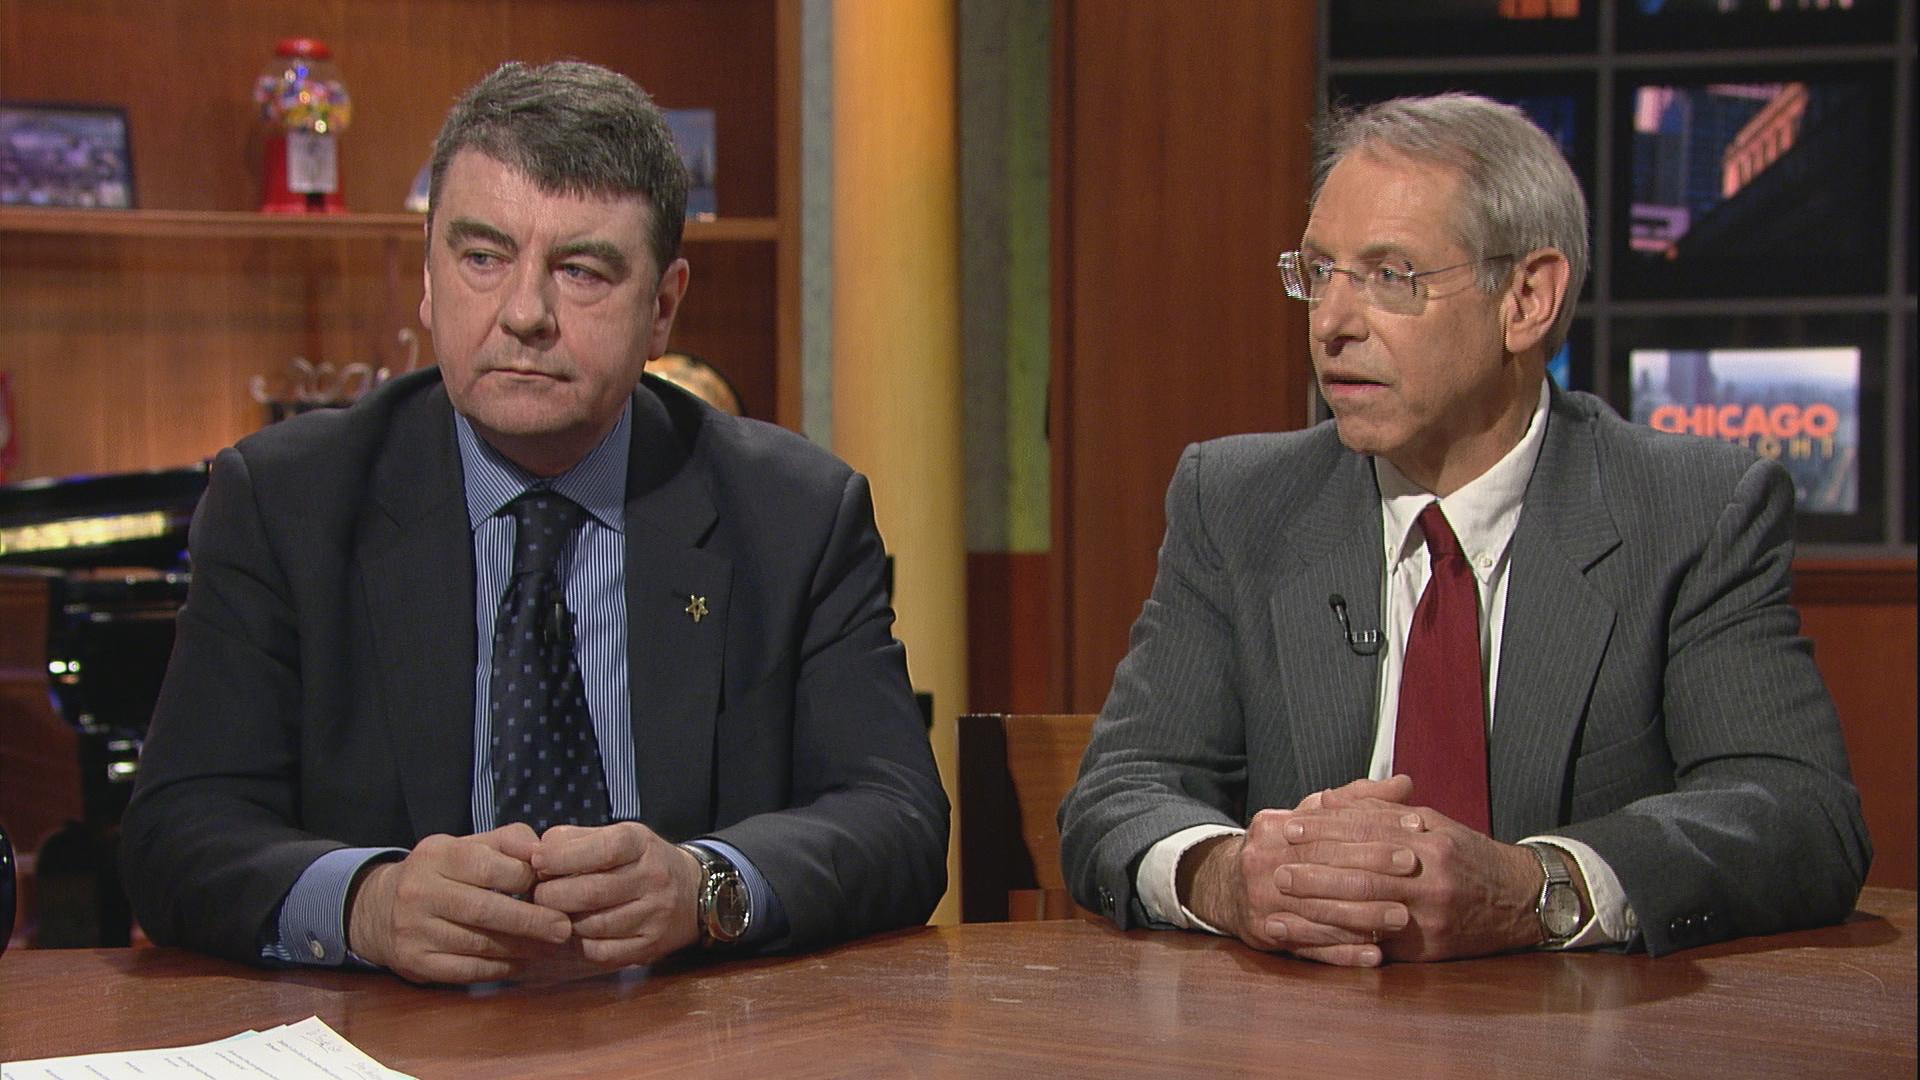 Dr. Francis Giles, left, and Steven Davidsen on "Chicago Tonight."